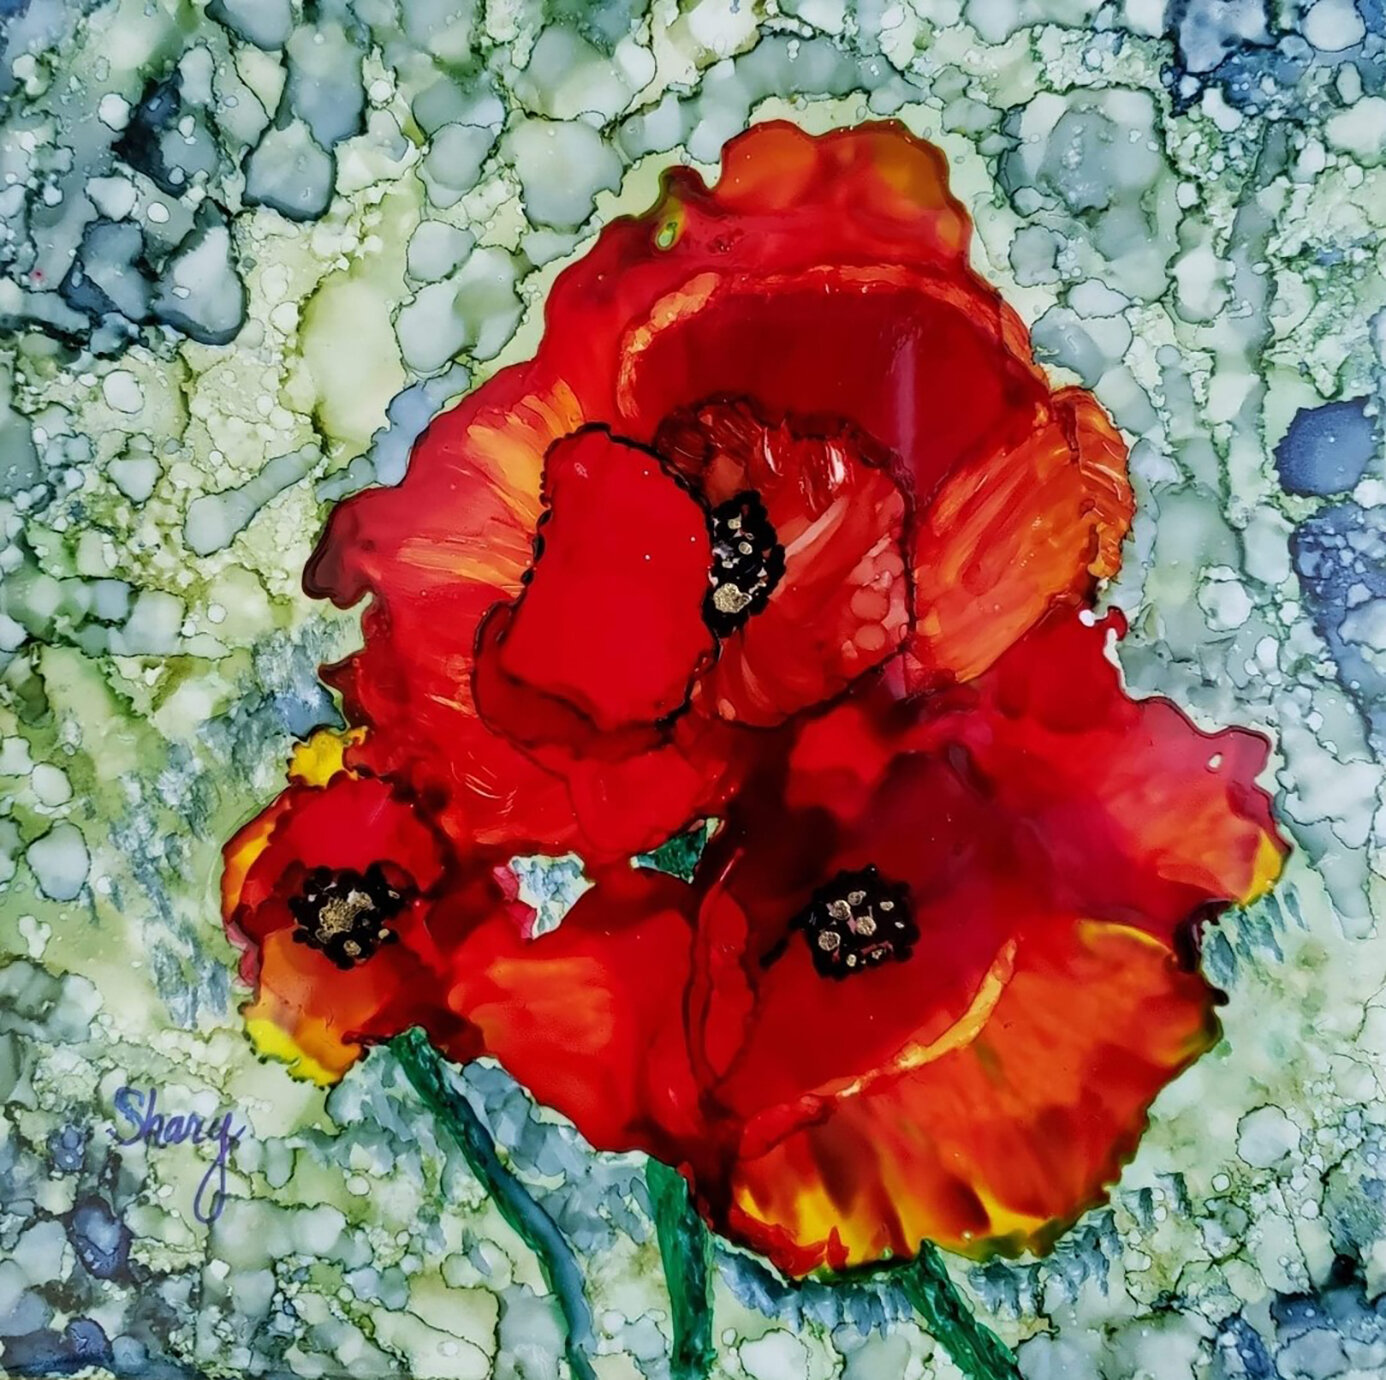 Alcohol ink tile by Shary Weckwerth. [Photo by Shary Weckworth}